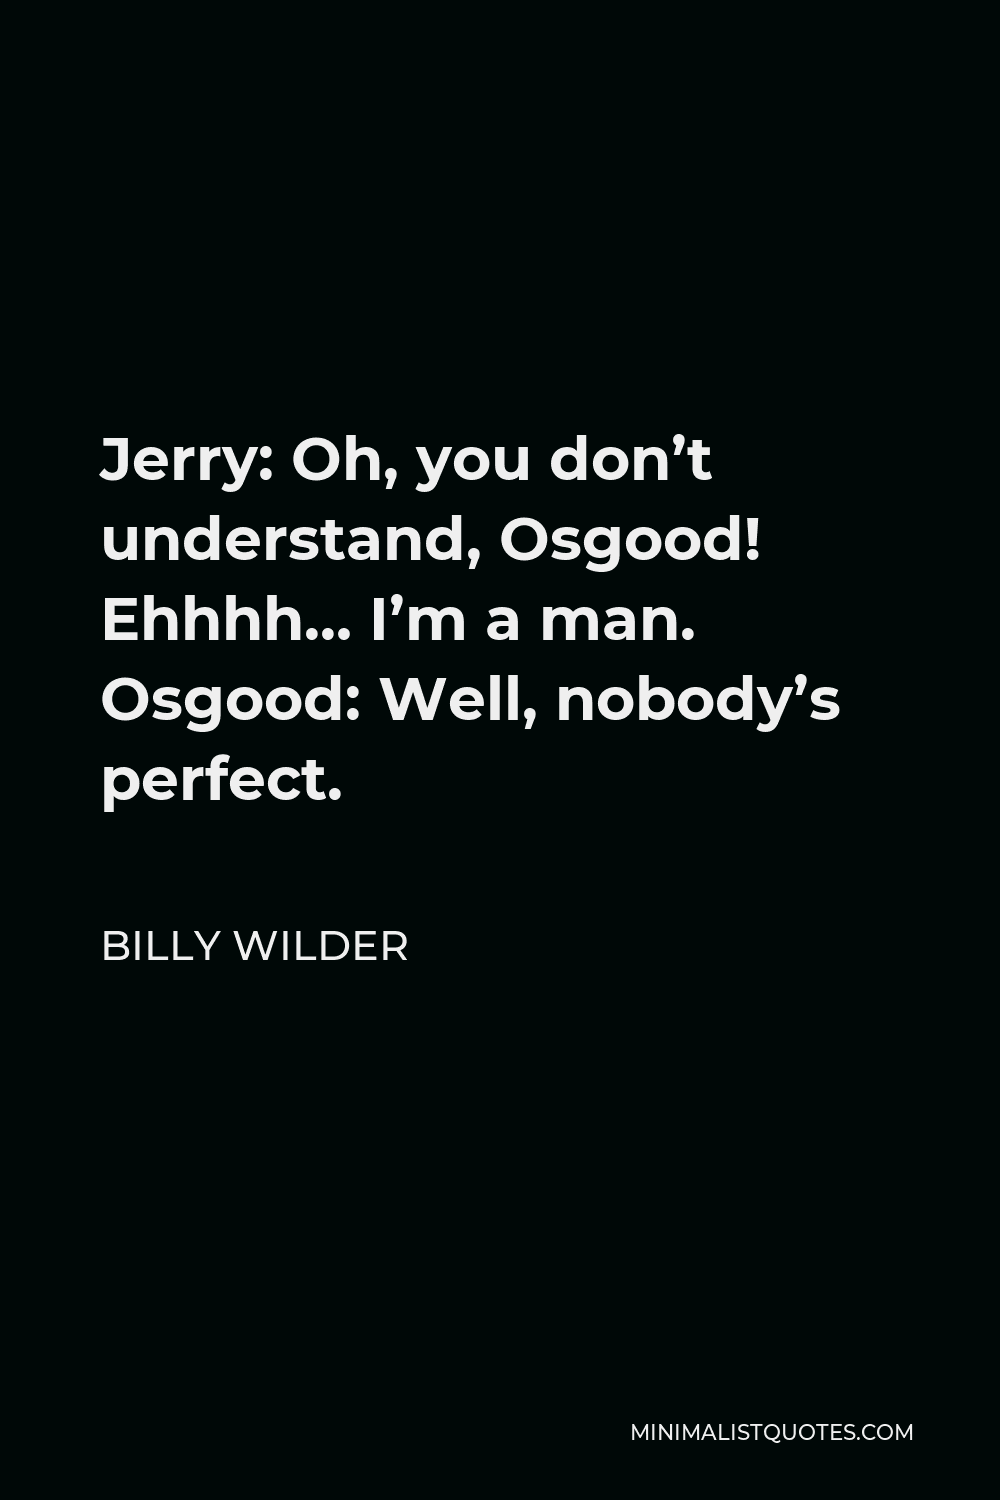 Billy Wilder Quote - Jerry: Oh, you don’t understand, Osgood! Ehhhh… I’m a man. Osgood: Well, nobody’s perfect.